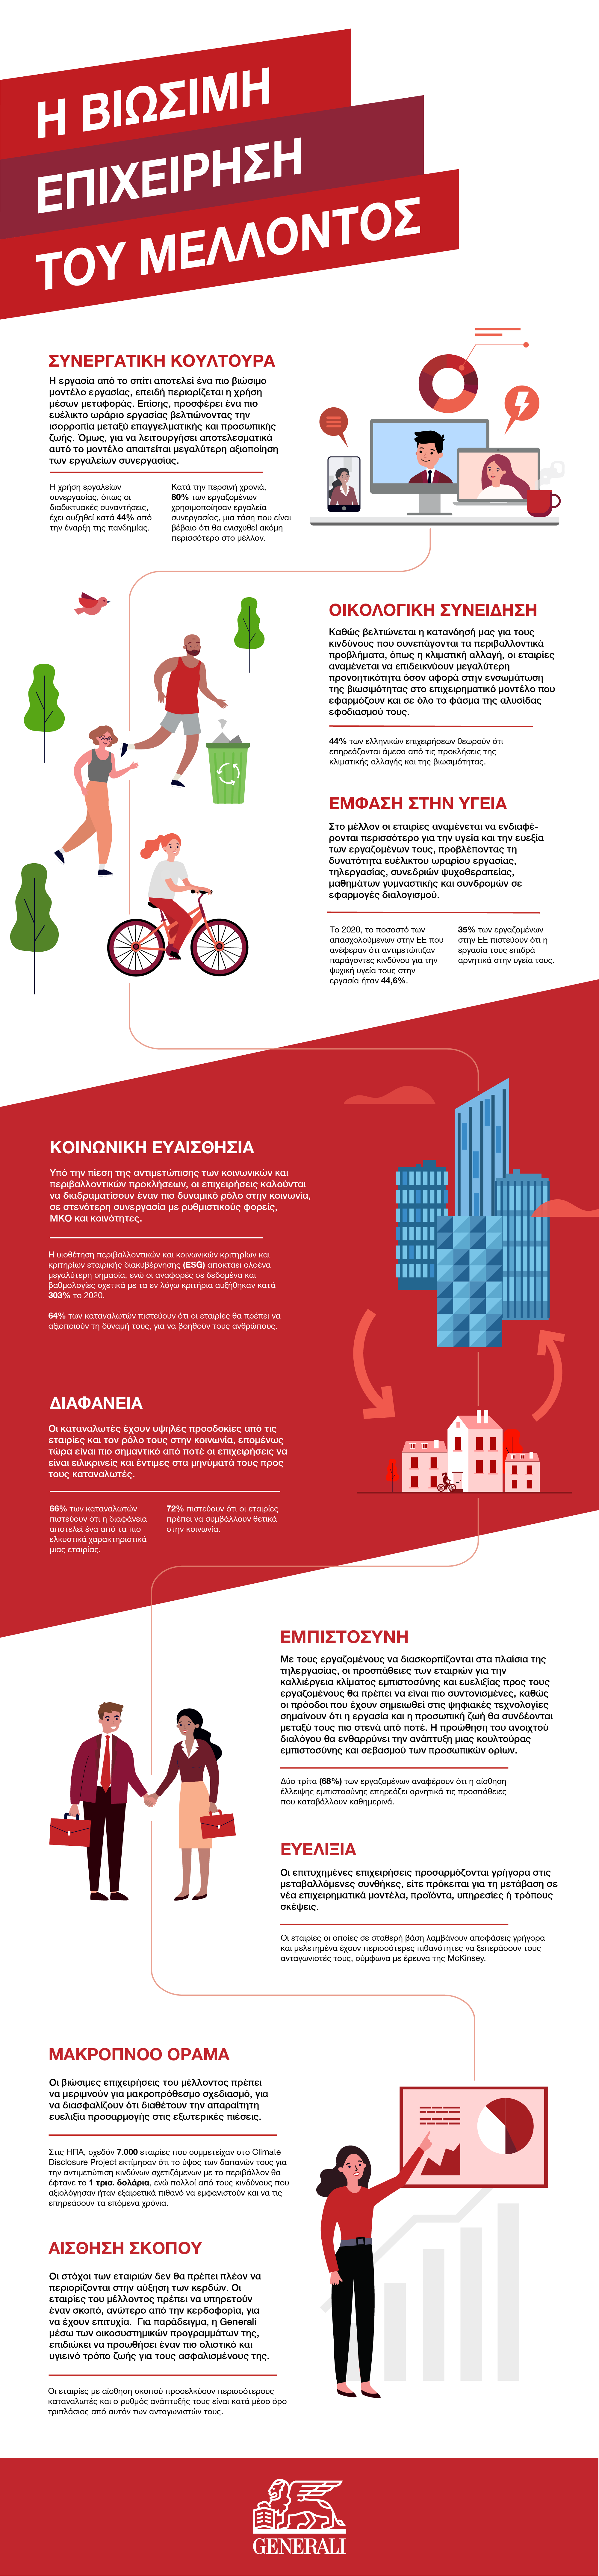 Generali_Infographic_SustainableBusiness_V3.png